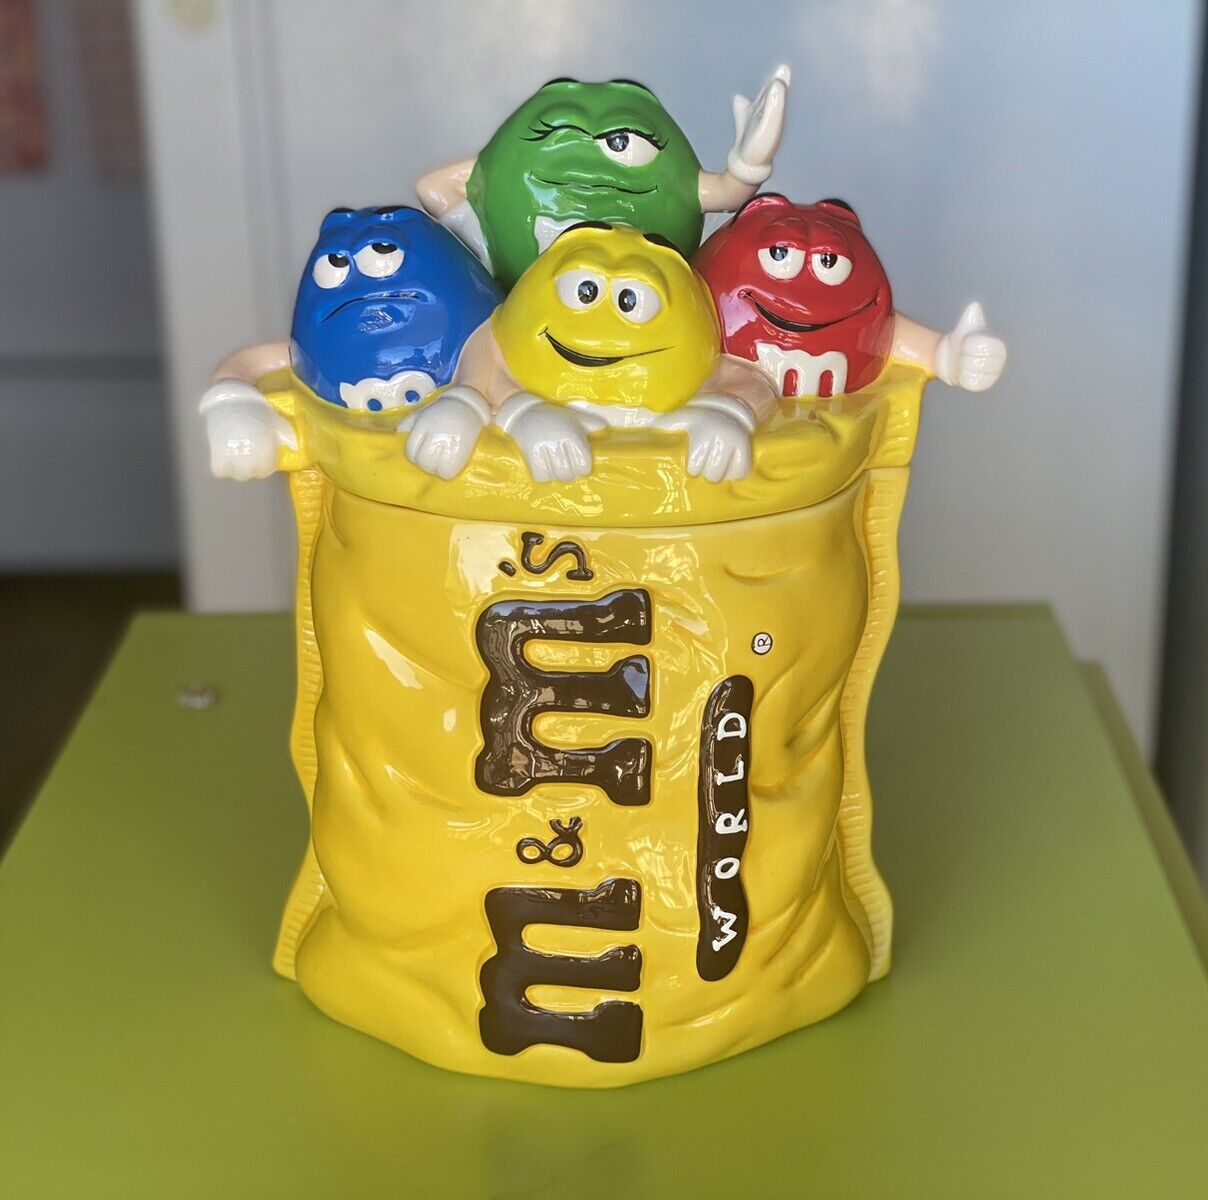 Rare M&Ms World Out of the Bag Ceramic Cookie Jar, Las Vegas Exclusive